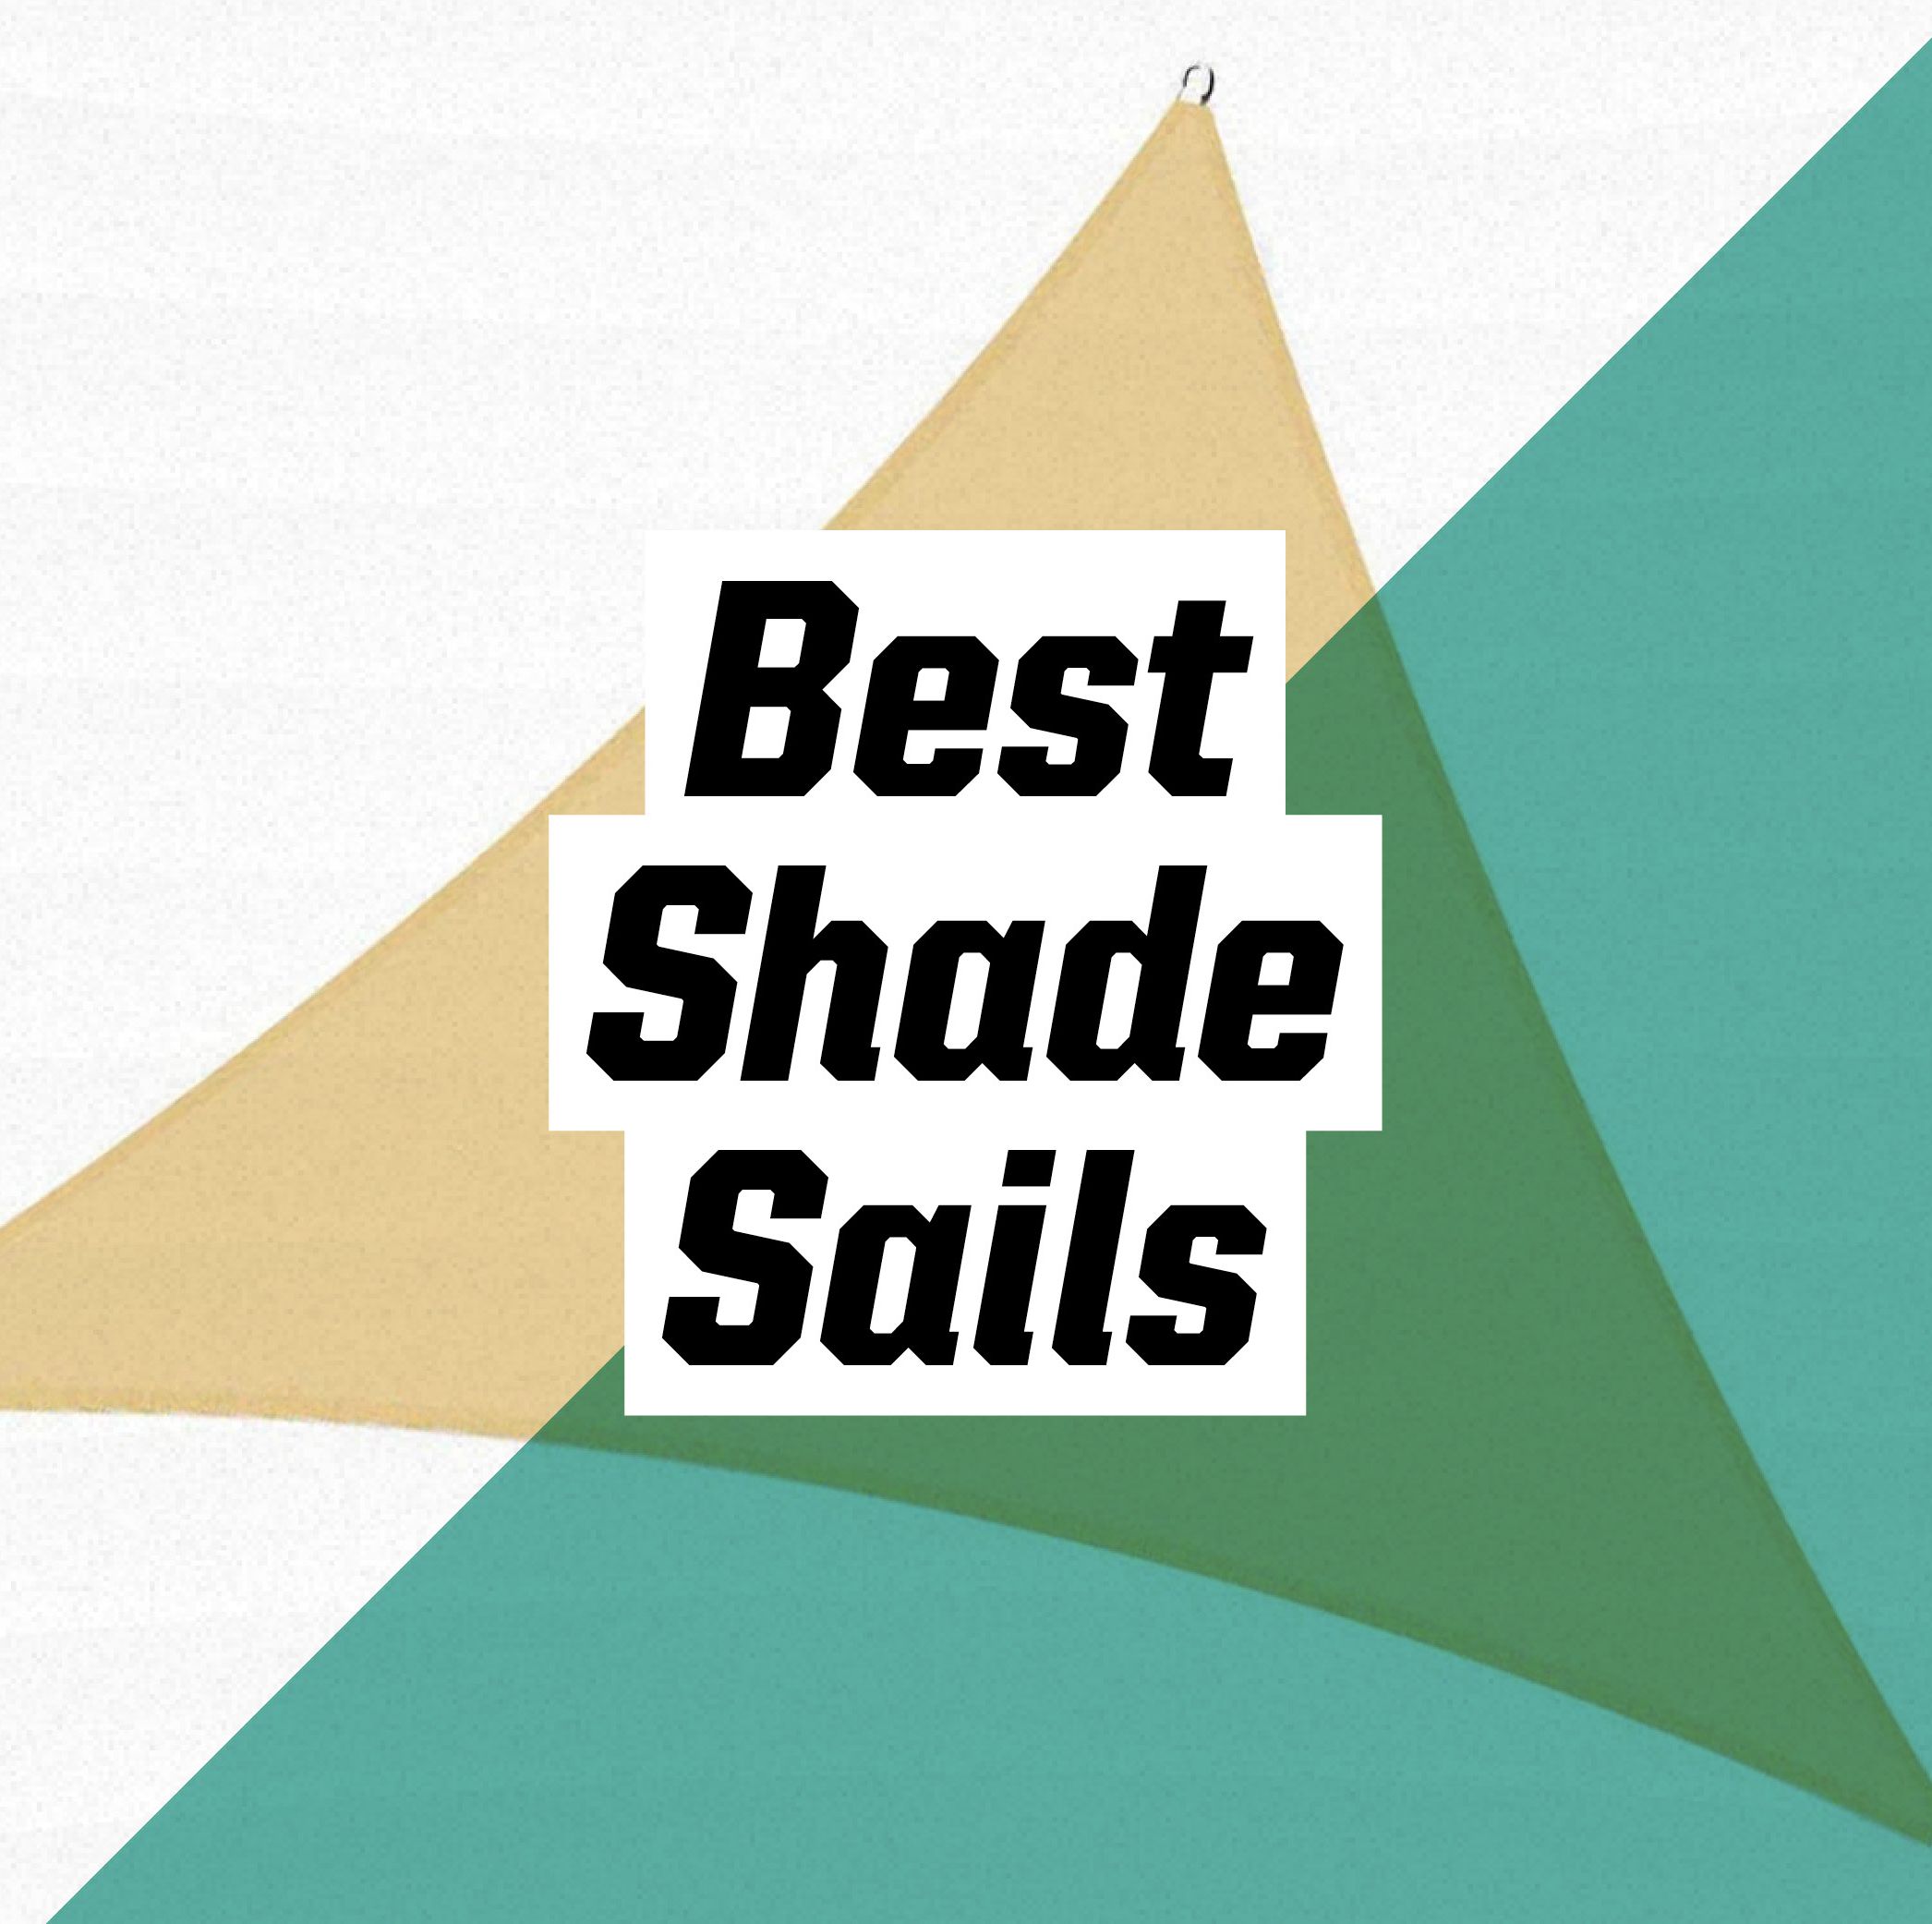 The 10 Best Shade Sails to Beat the Summer Heat